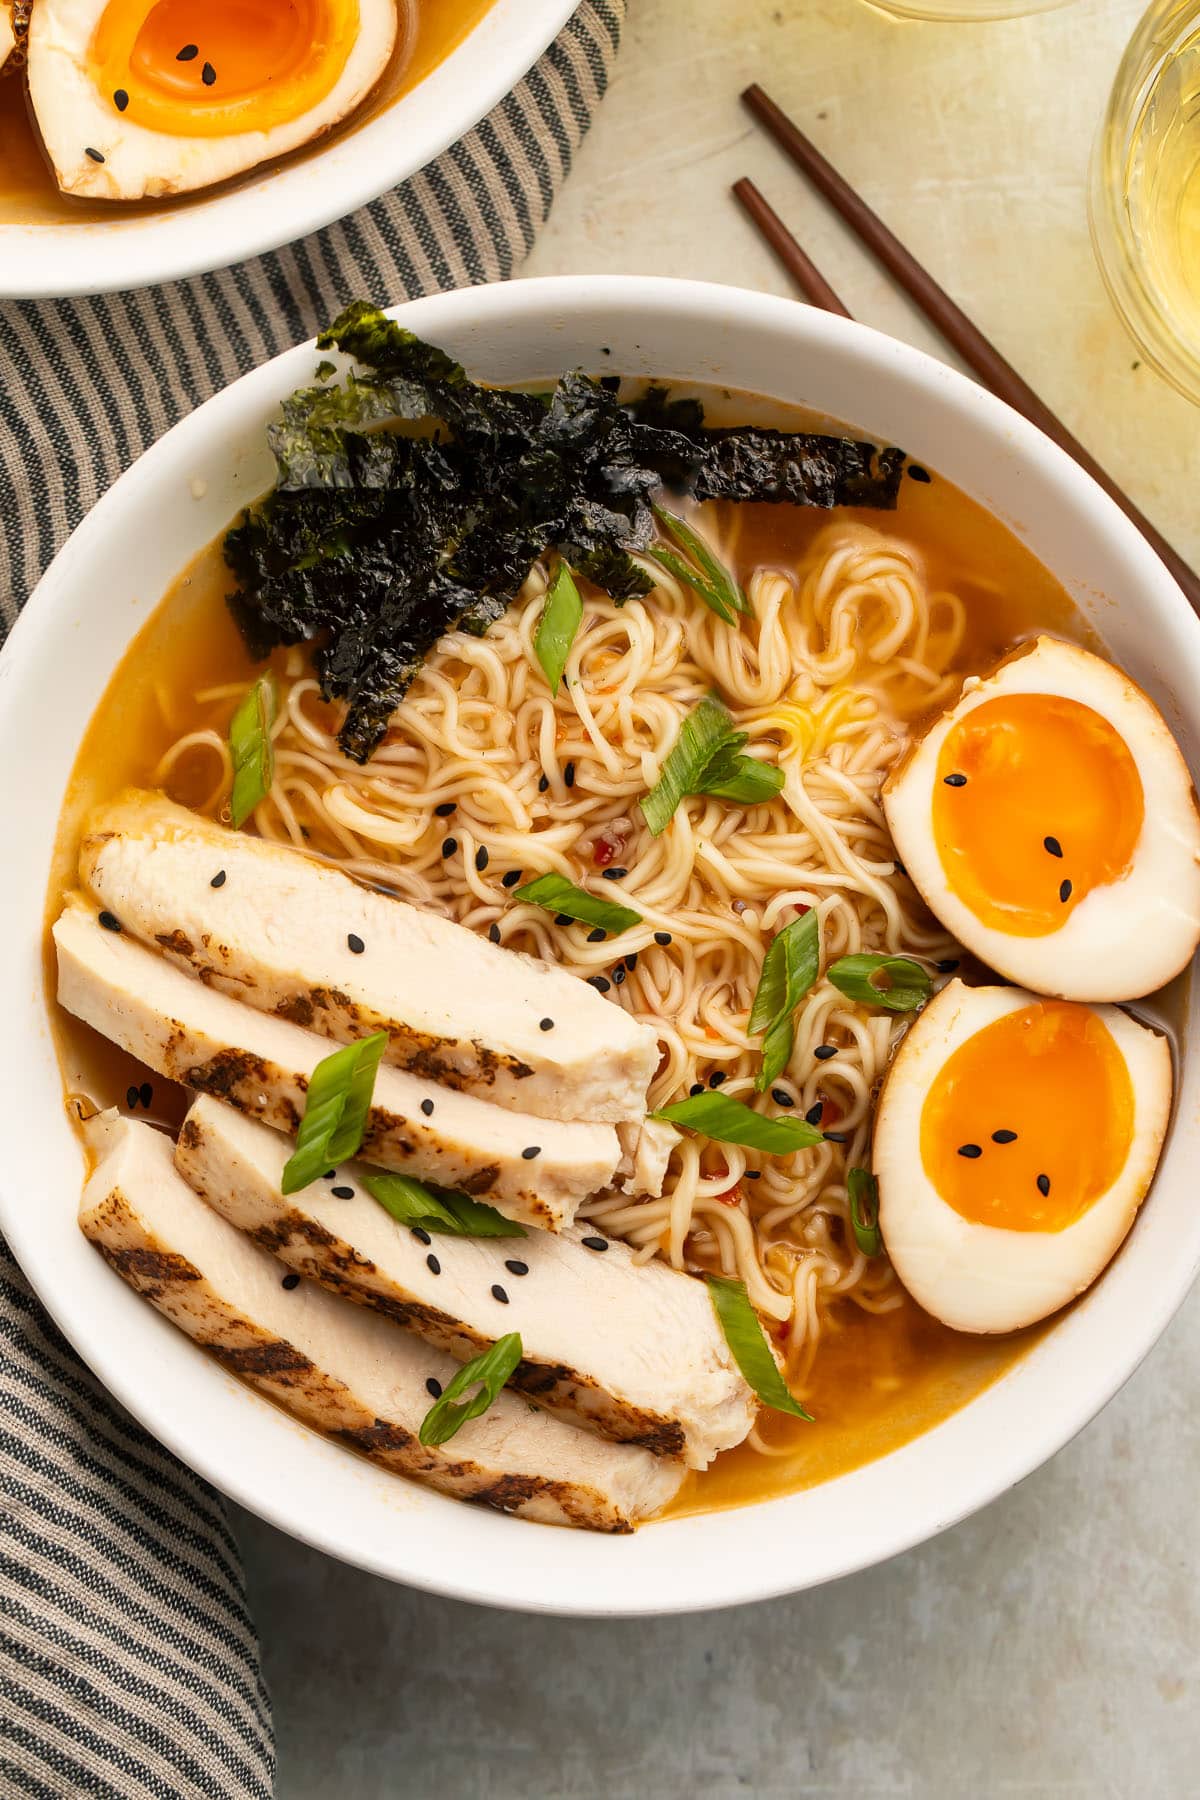 Top-down view of a white bowl holding spicy ramen noodles in broth with slices of chicken, two yolky egg halves, and green garnish.